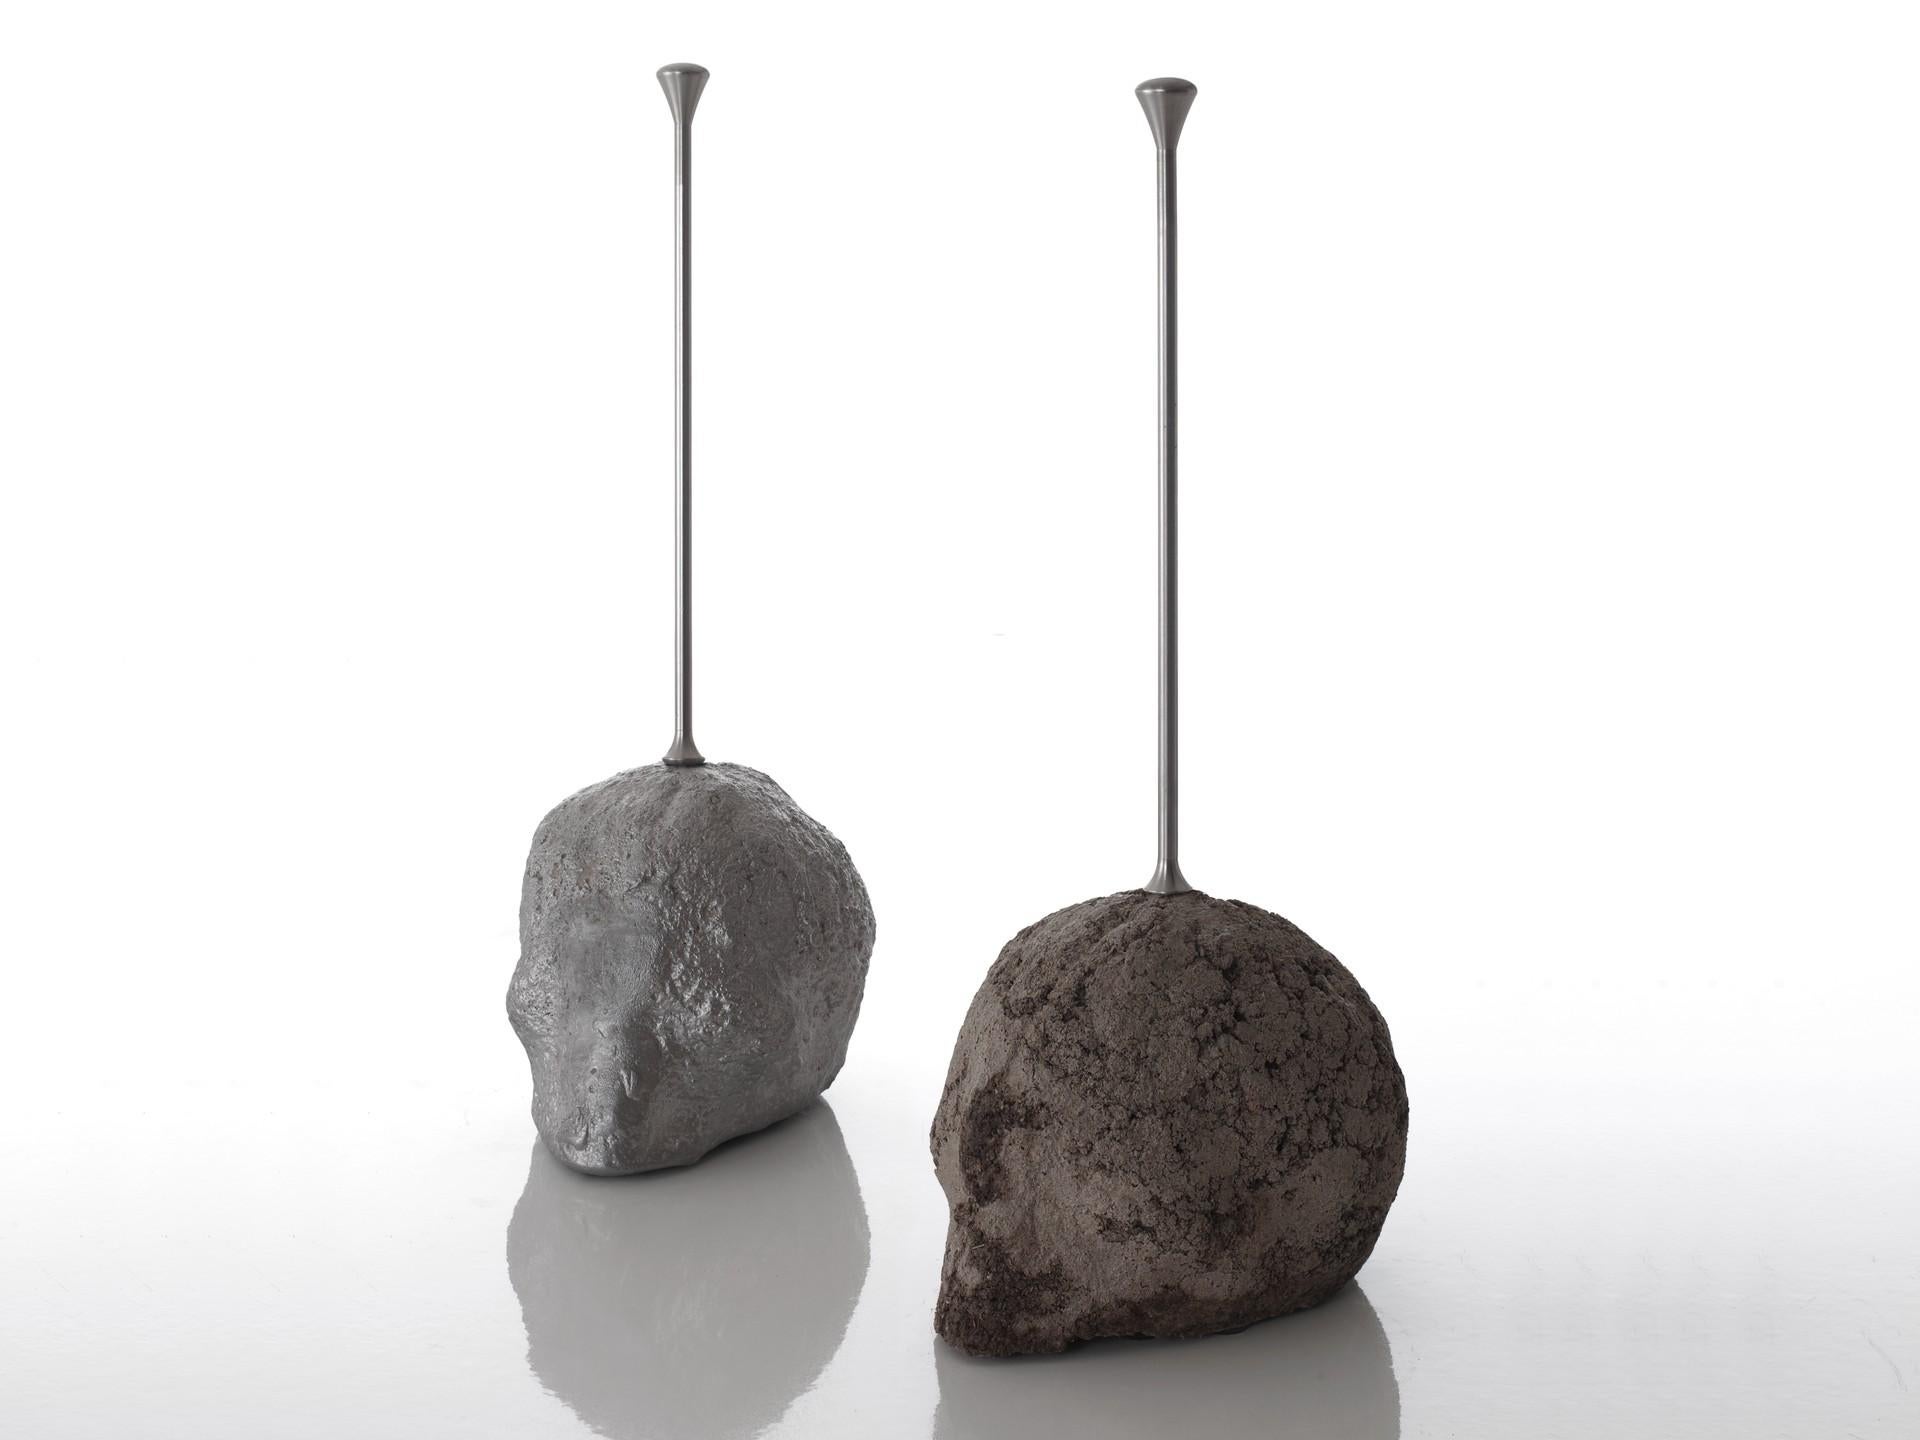 Pair of Fondamenta Sculptures by Imperfettolab
Limited Edition
Dimensions: 22 x 16 x H 58
Materials: Aluminum, Resin



Imperfetto Lab
Who we are ? We are a family.
Verter Turroni, Emanuela Ravelli and our children Elia, Margherita and